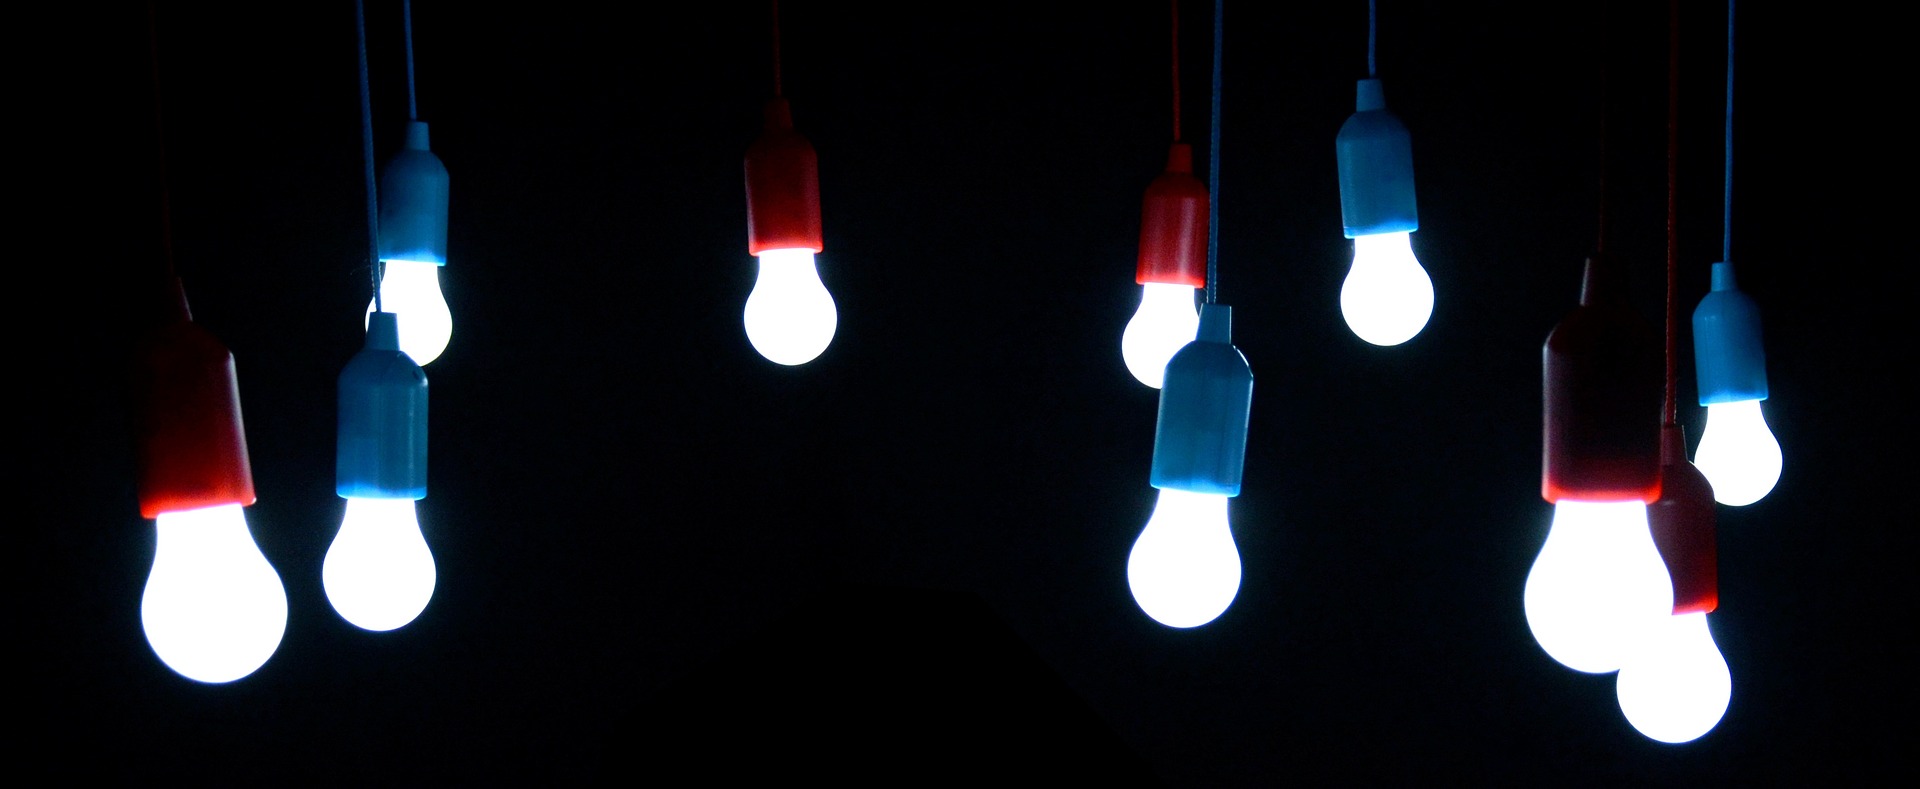 LED lightbulbs hanging in the darkness, lit up